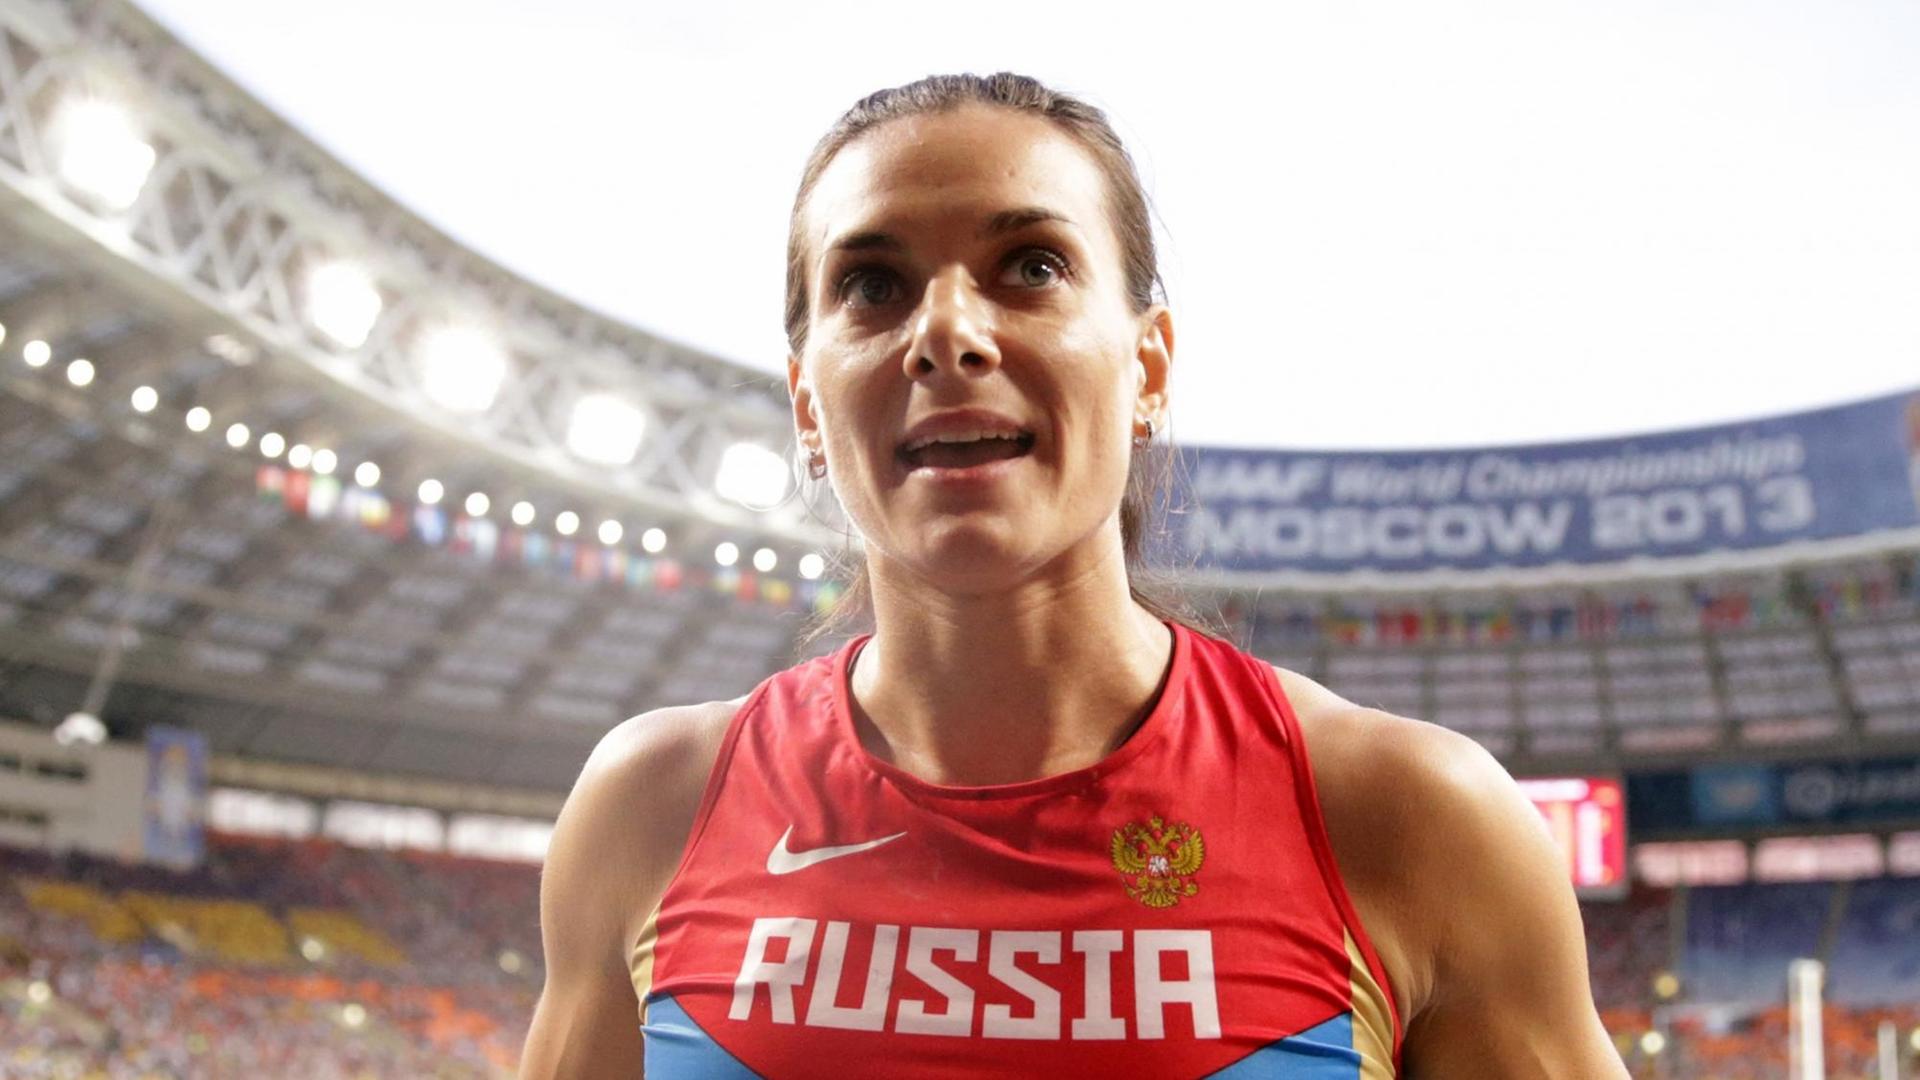 Yelena Isinbayeva of Russia reacts in the women's Pole Vault final at the 14th IAAF World Championships in Athletics at Luzhniki Stadium in Moscow, Russia, 13 August 2013.